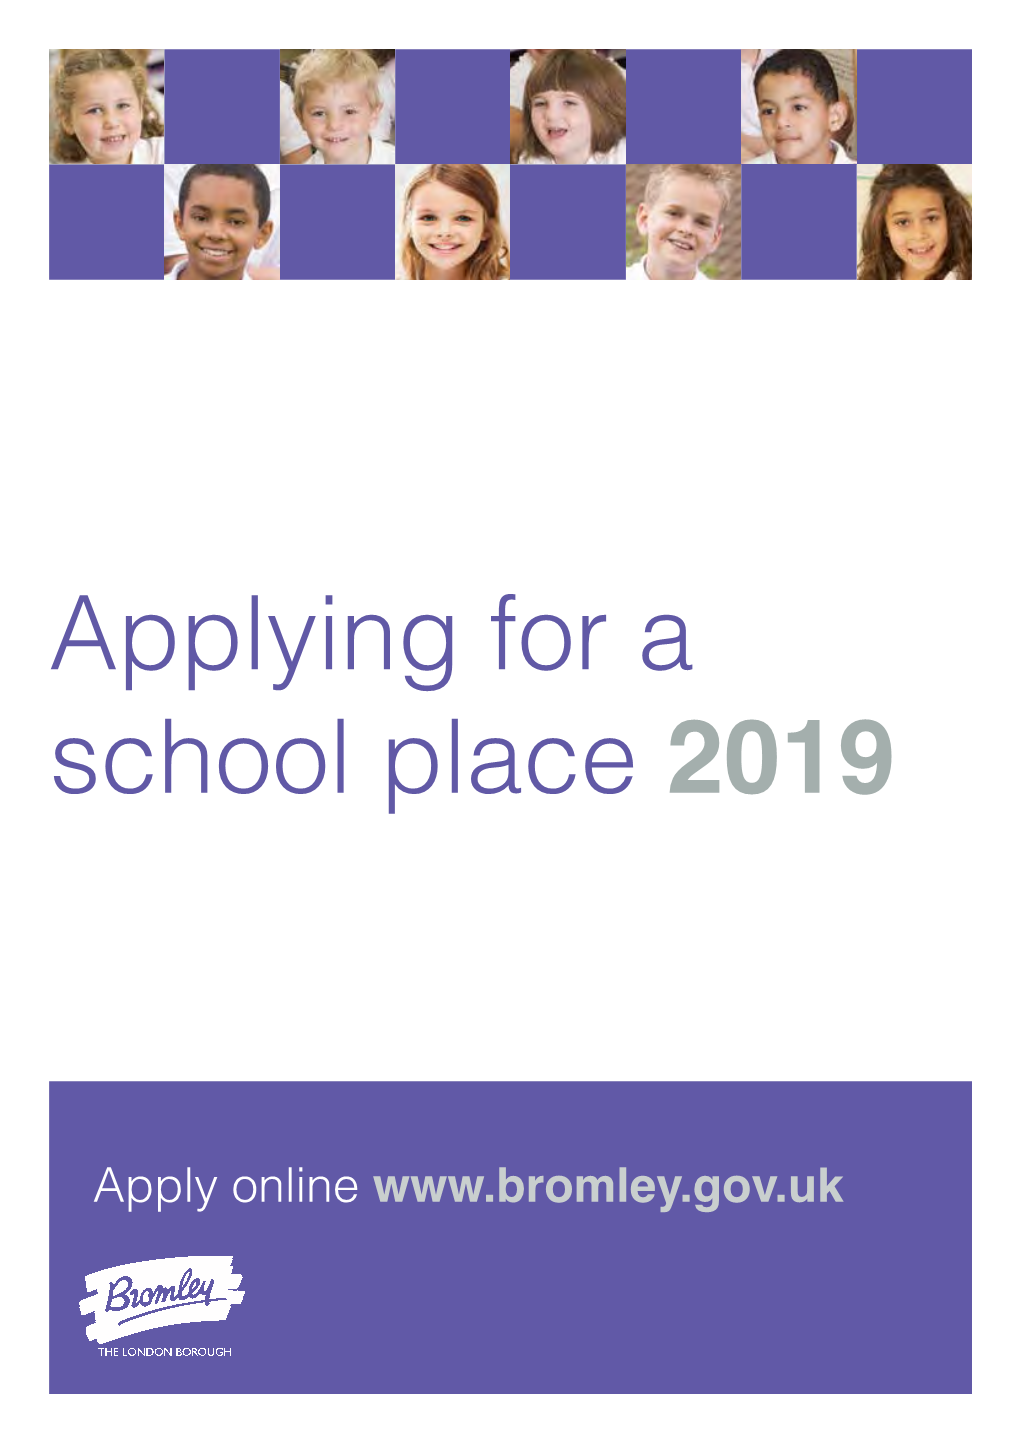 Applying for a School Place 2019